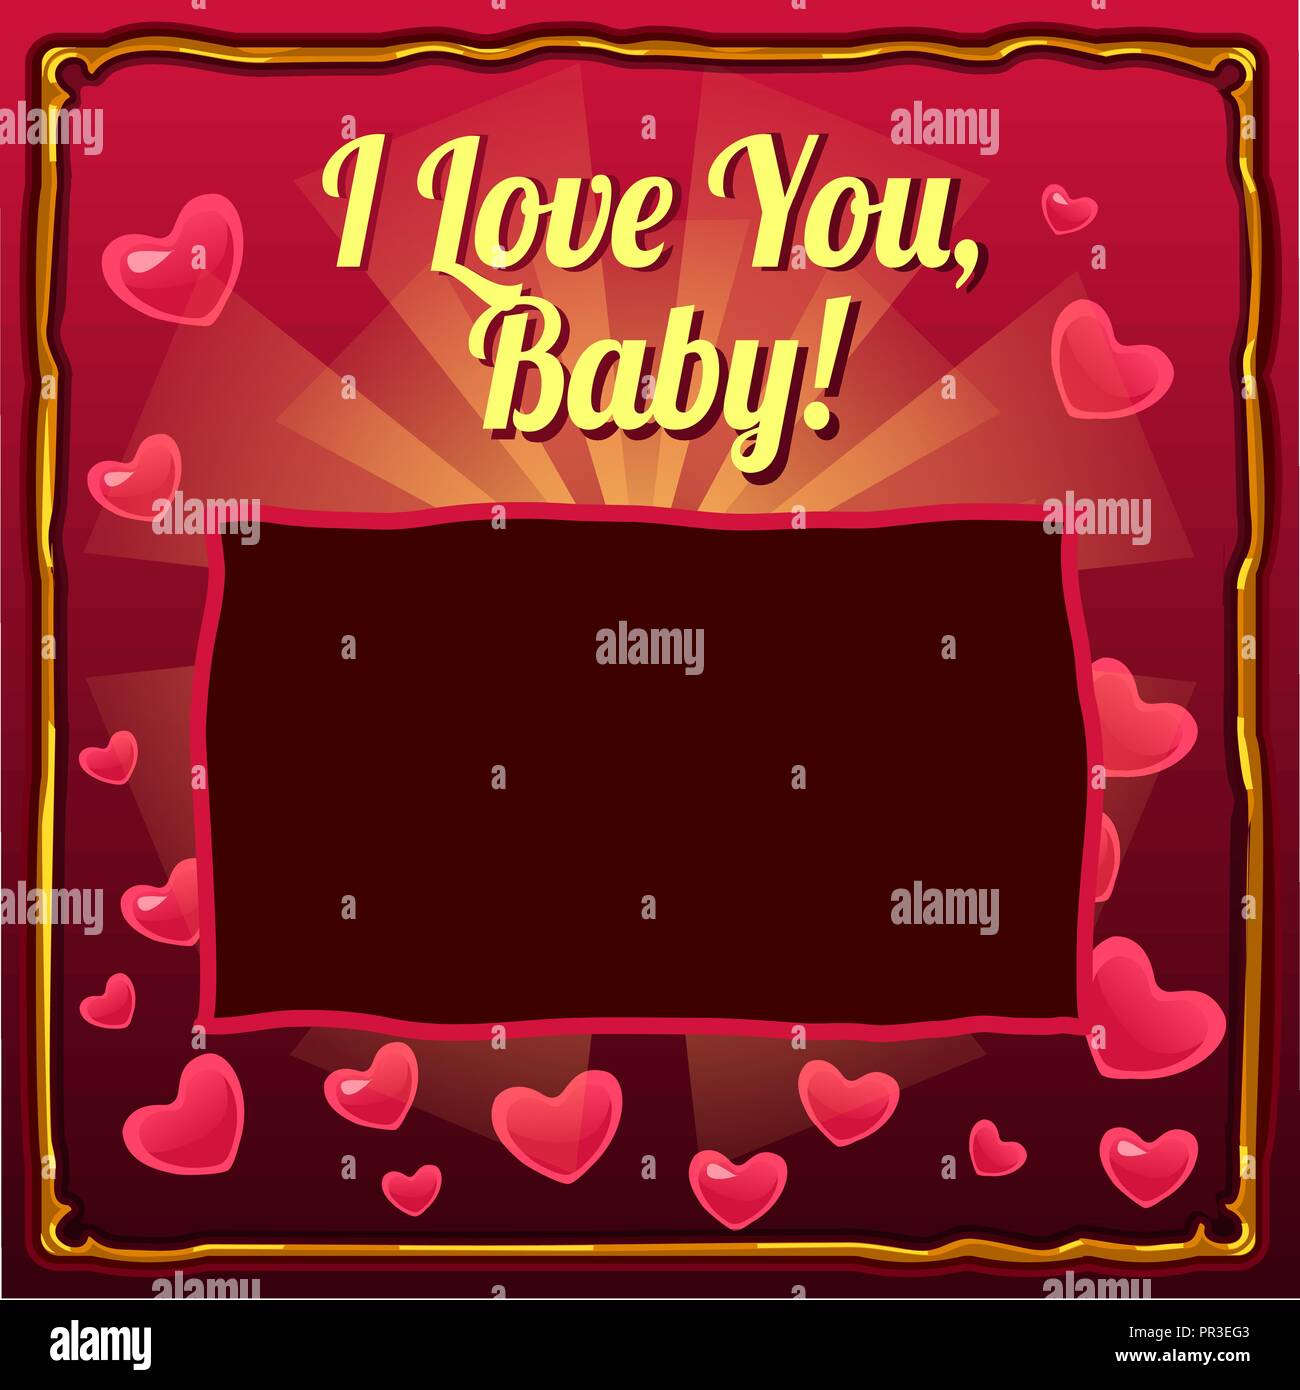 Cute Poster With Space For Your Text And The Words I Love You Baby On A Background Of Hearts Cover For Baby Photo Album Or Photo Frame Vector Cartoon Close Up Illustration Stock